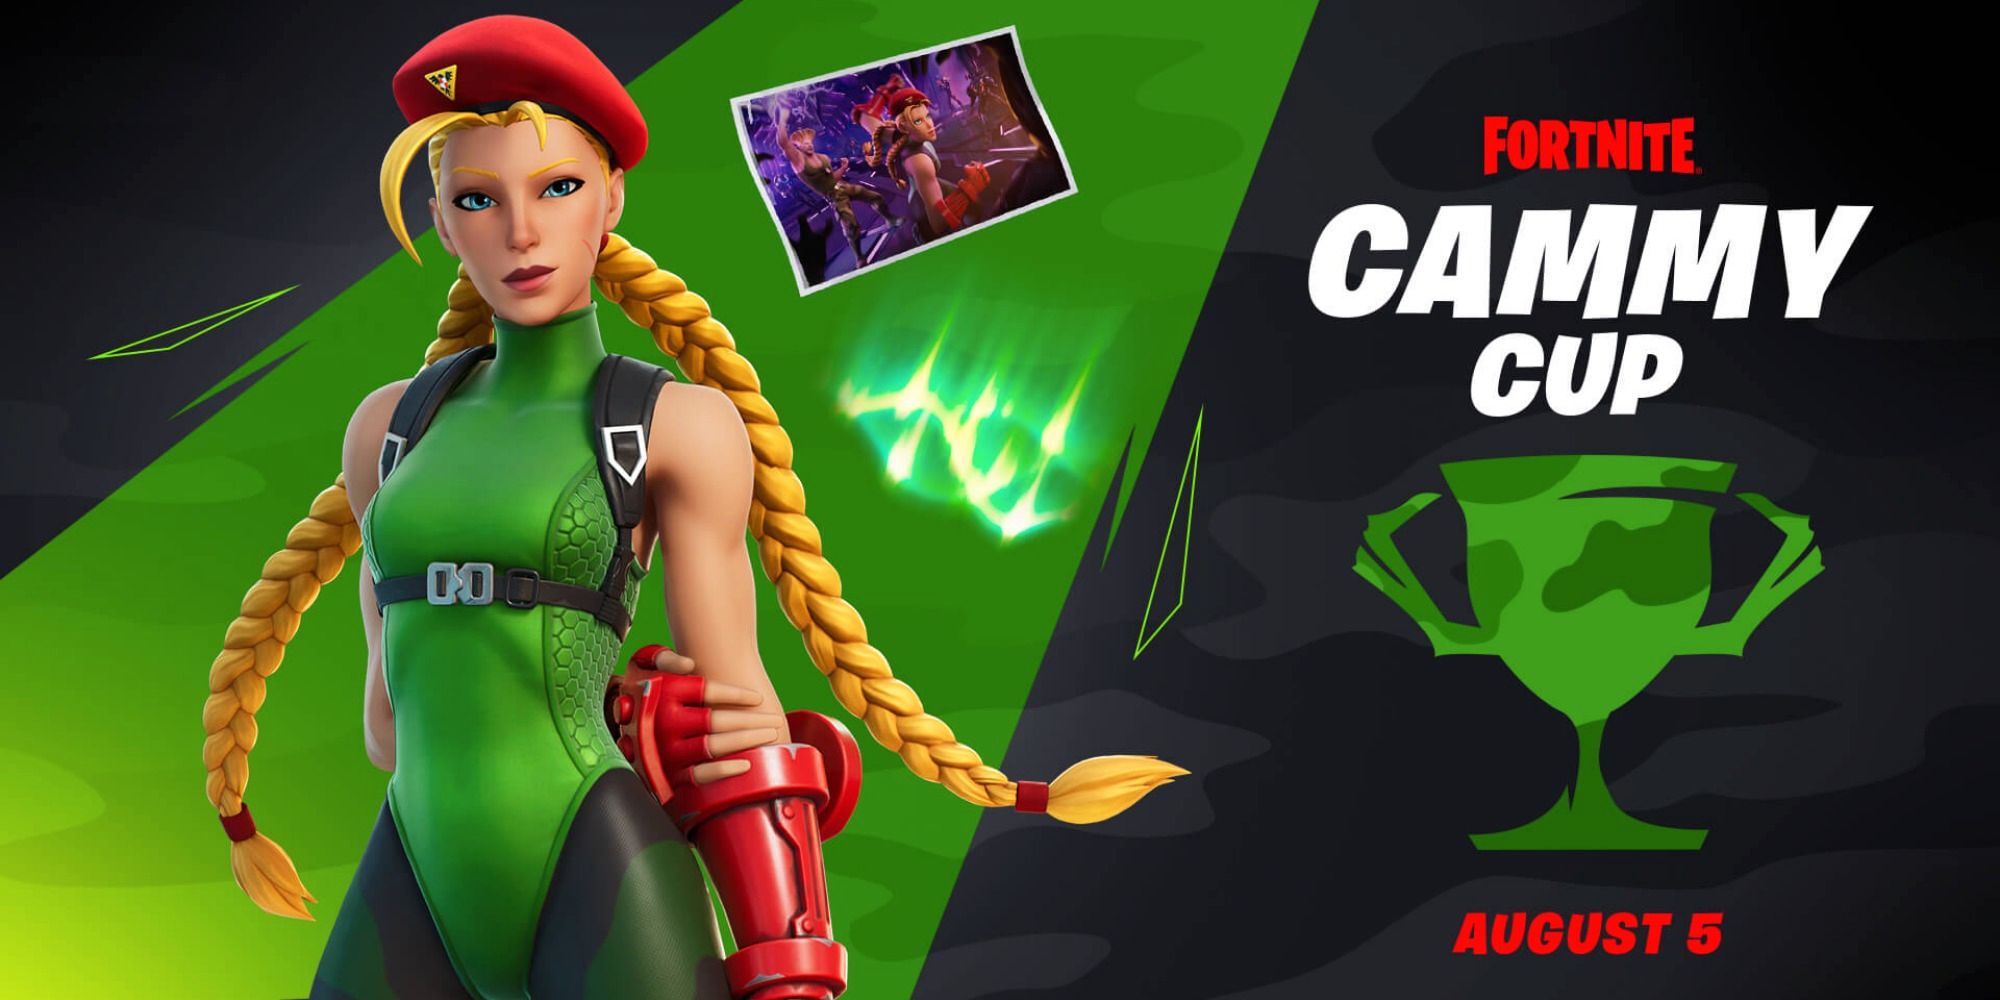 Coupe Cammy Fortnite